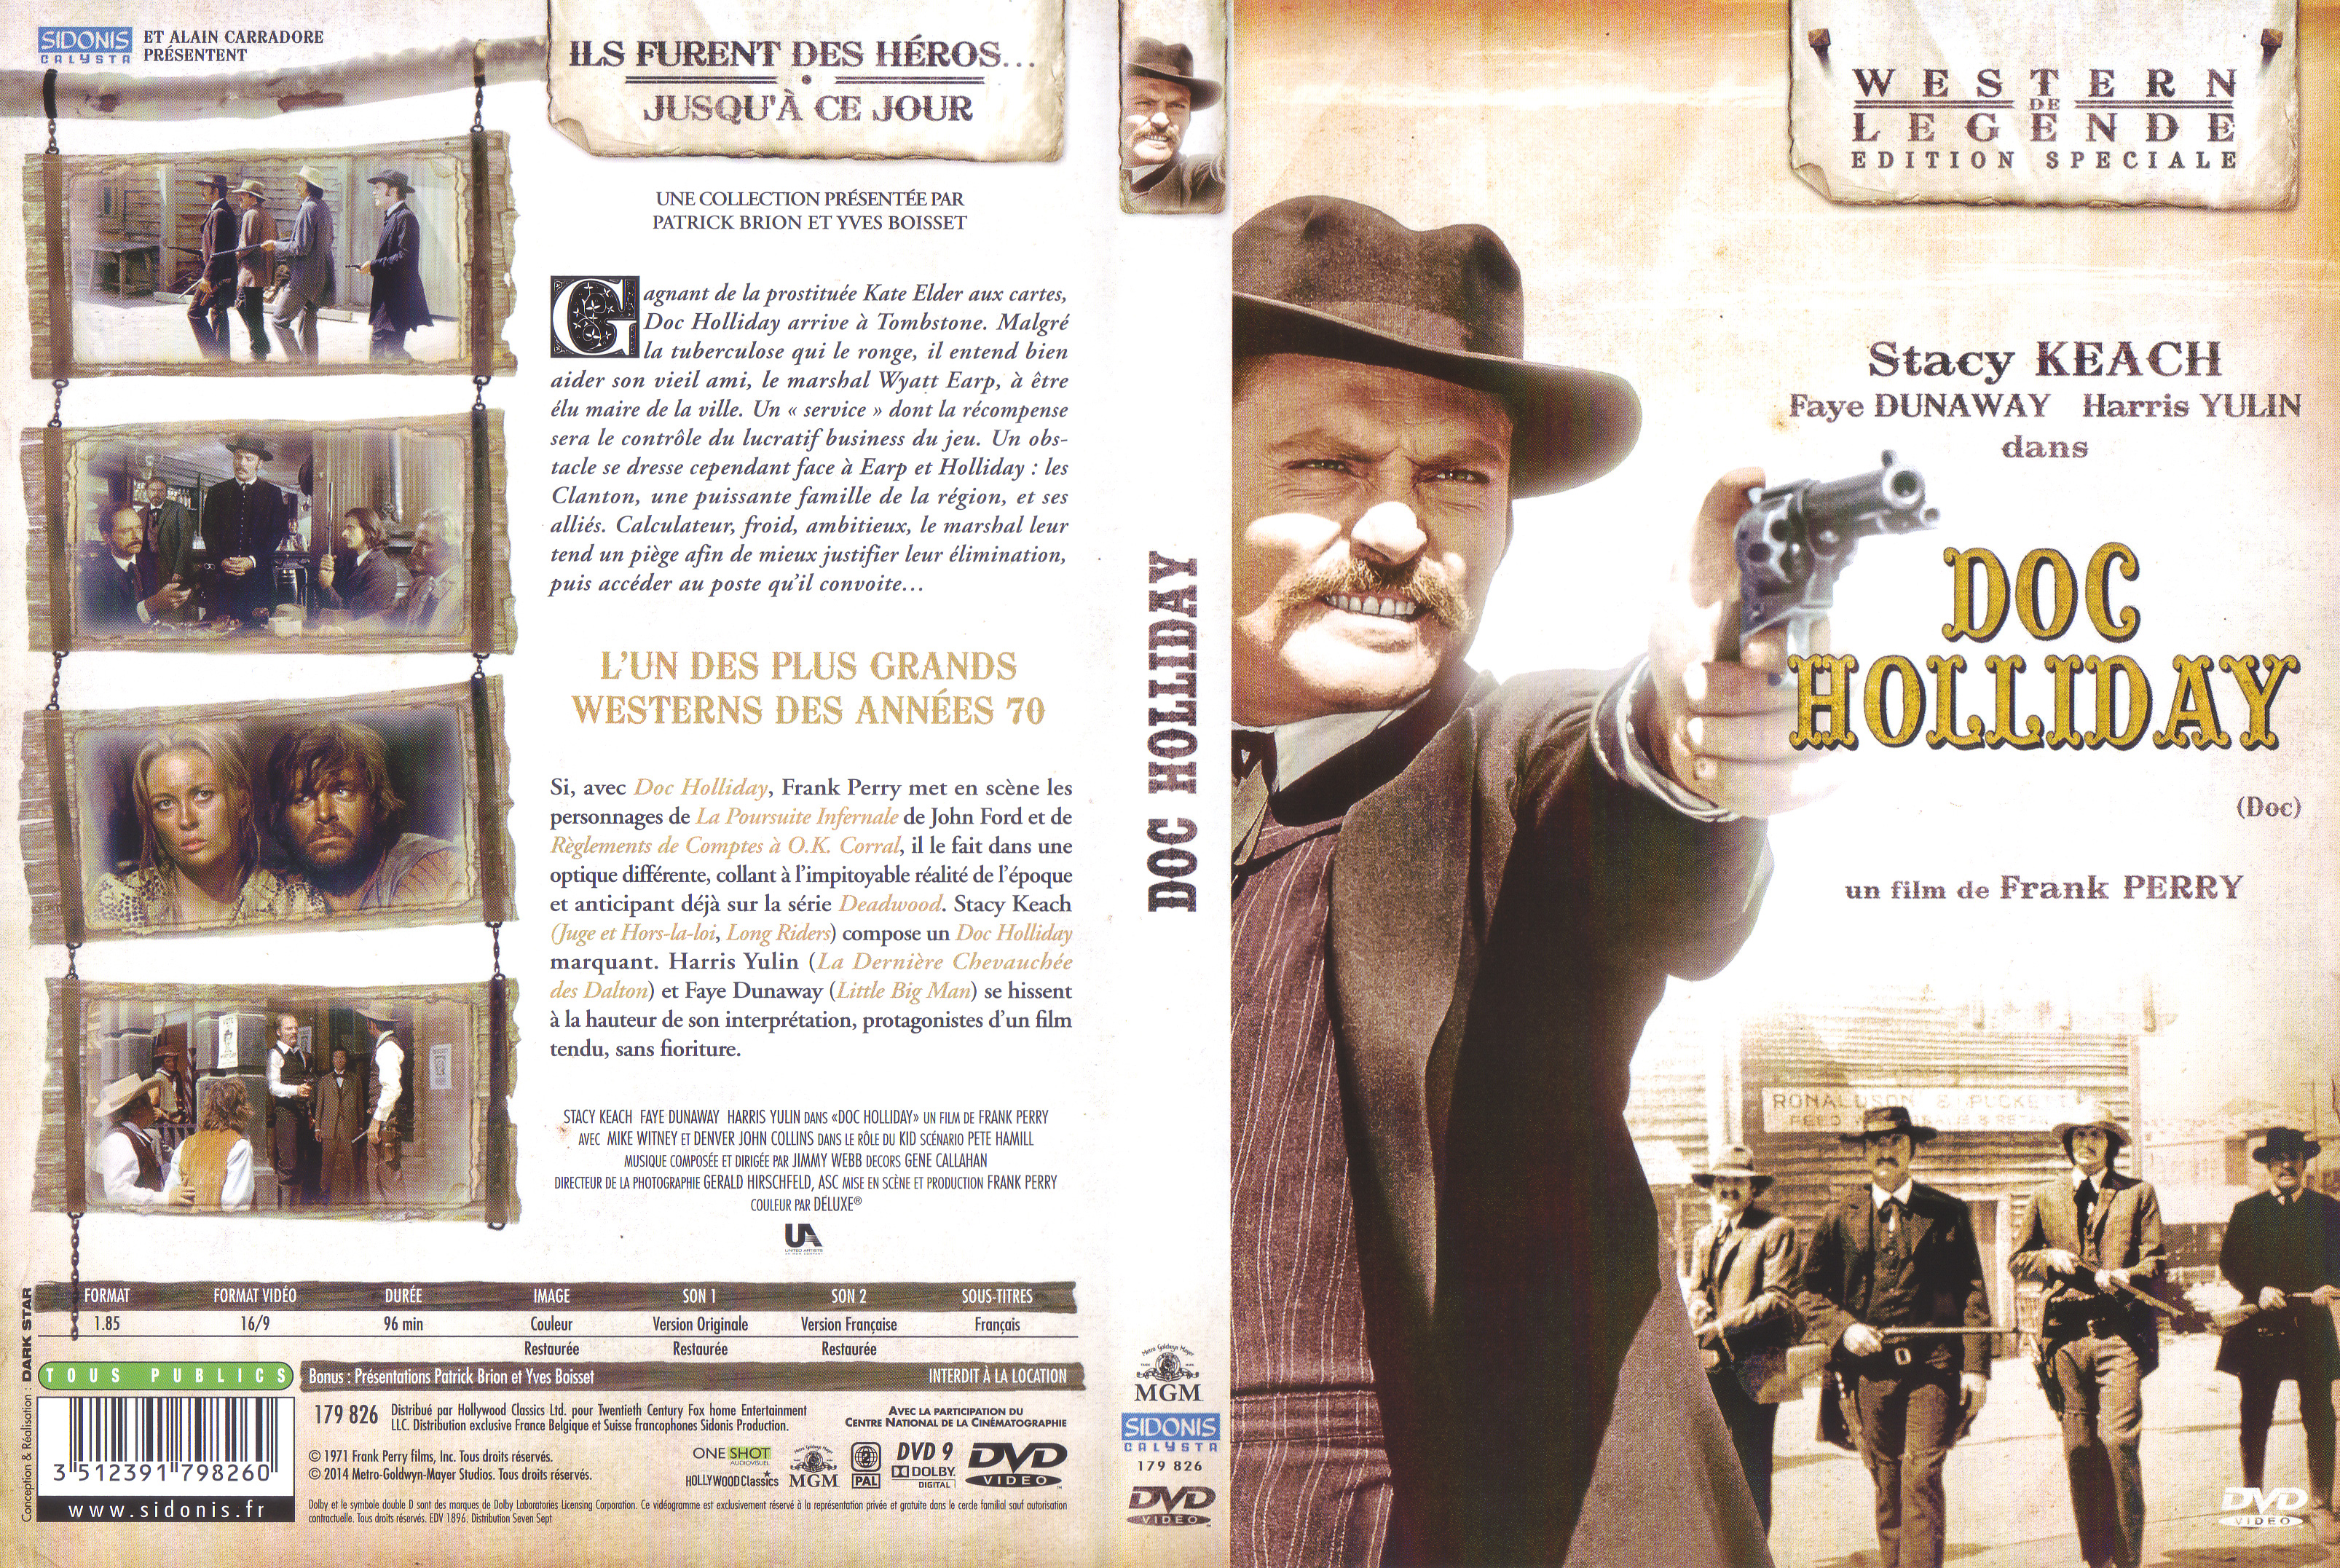 Jaquette DVD Doc Holliday